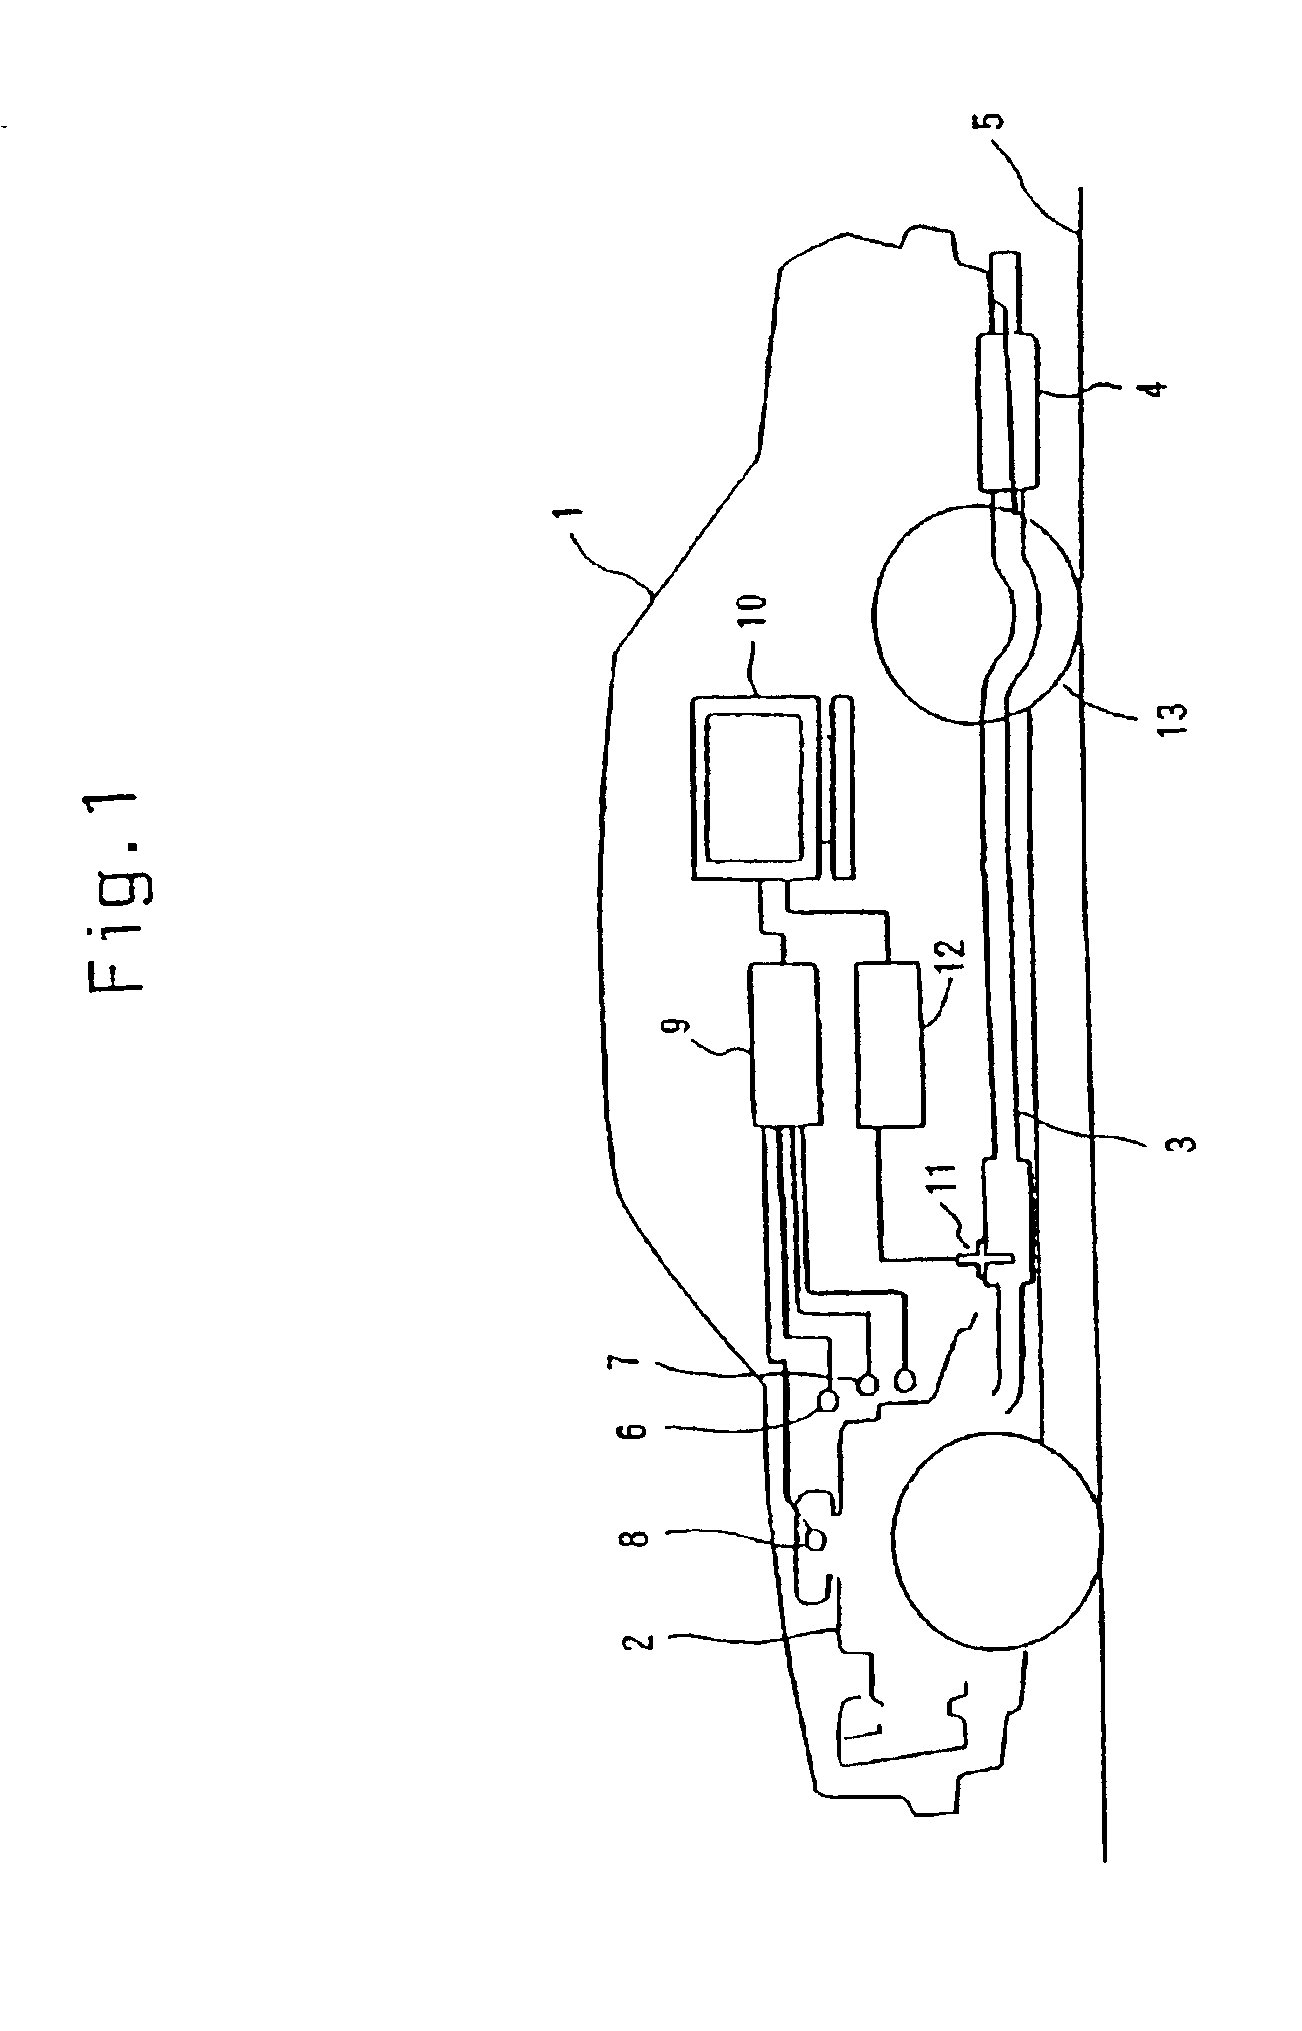 System and method for measuring brake mean effective pressure in a running vehicle